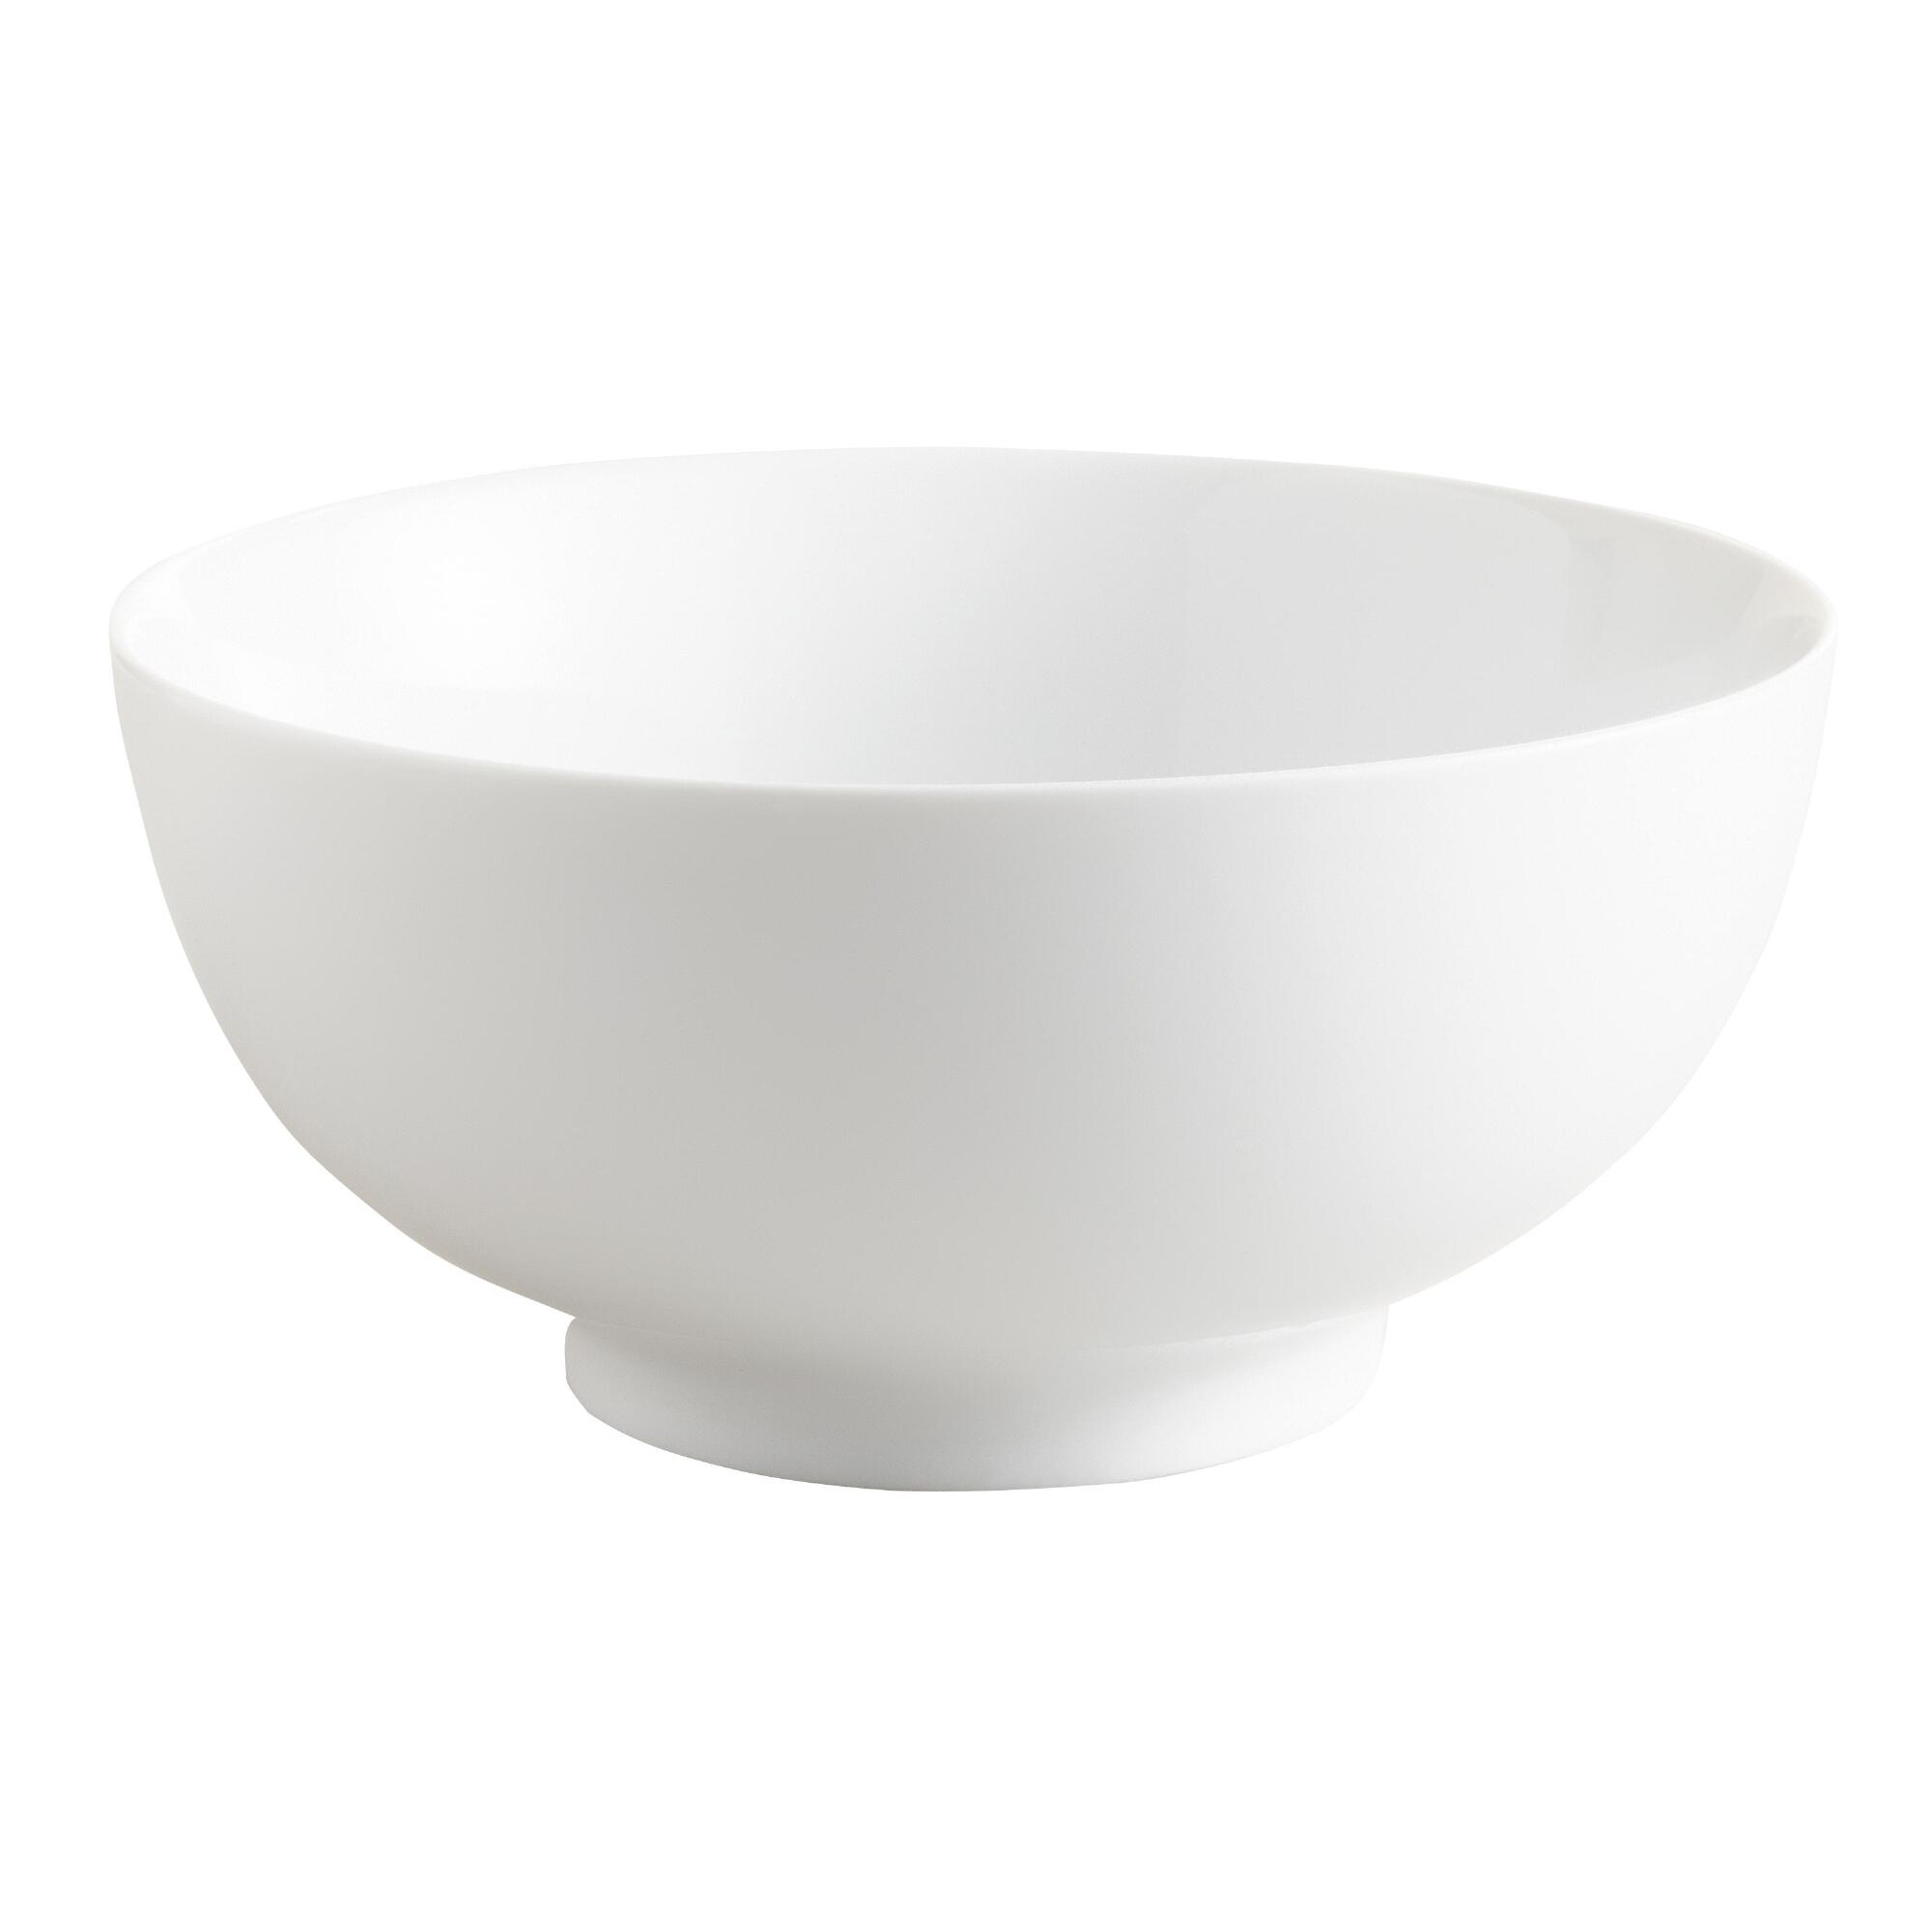 Small White Porcelain All Purpose Bowls Set Of 2 by World Market